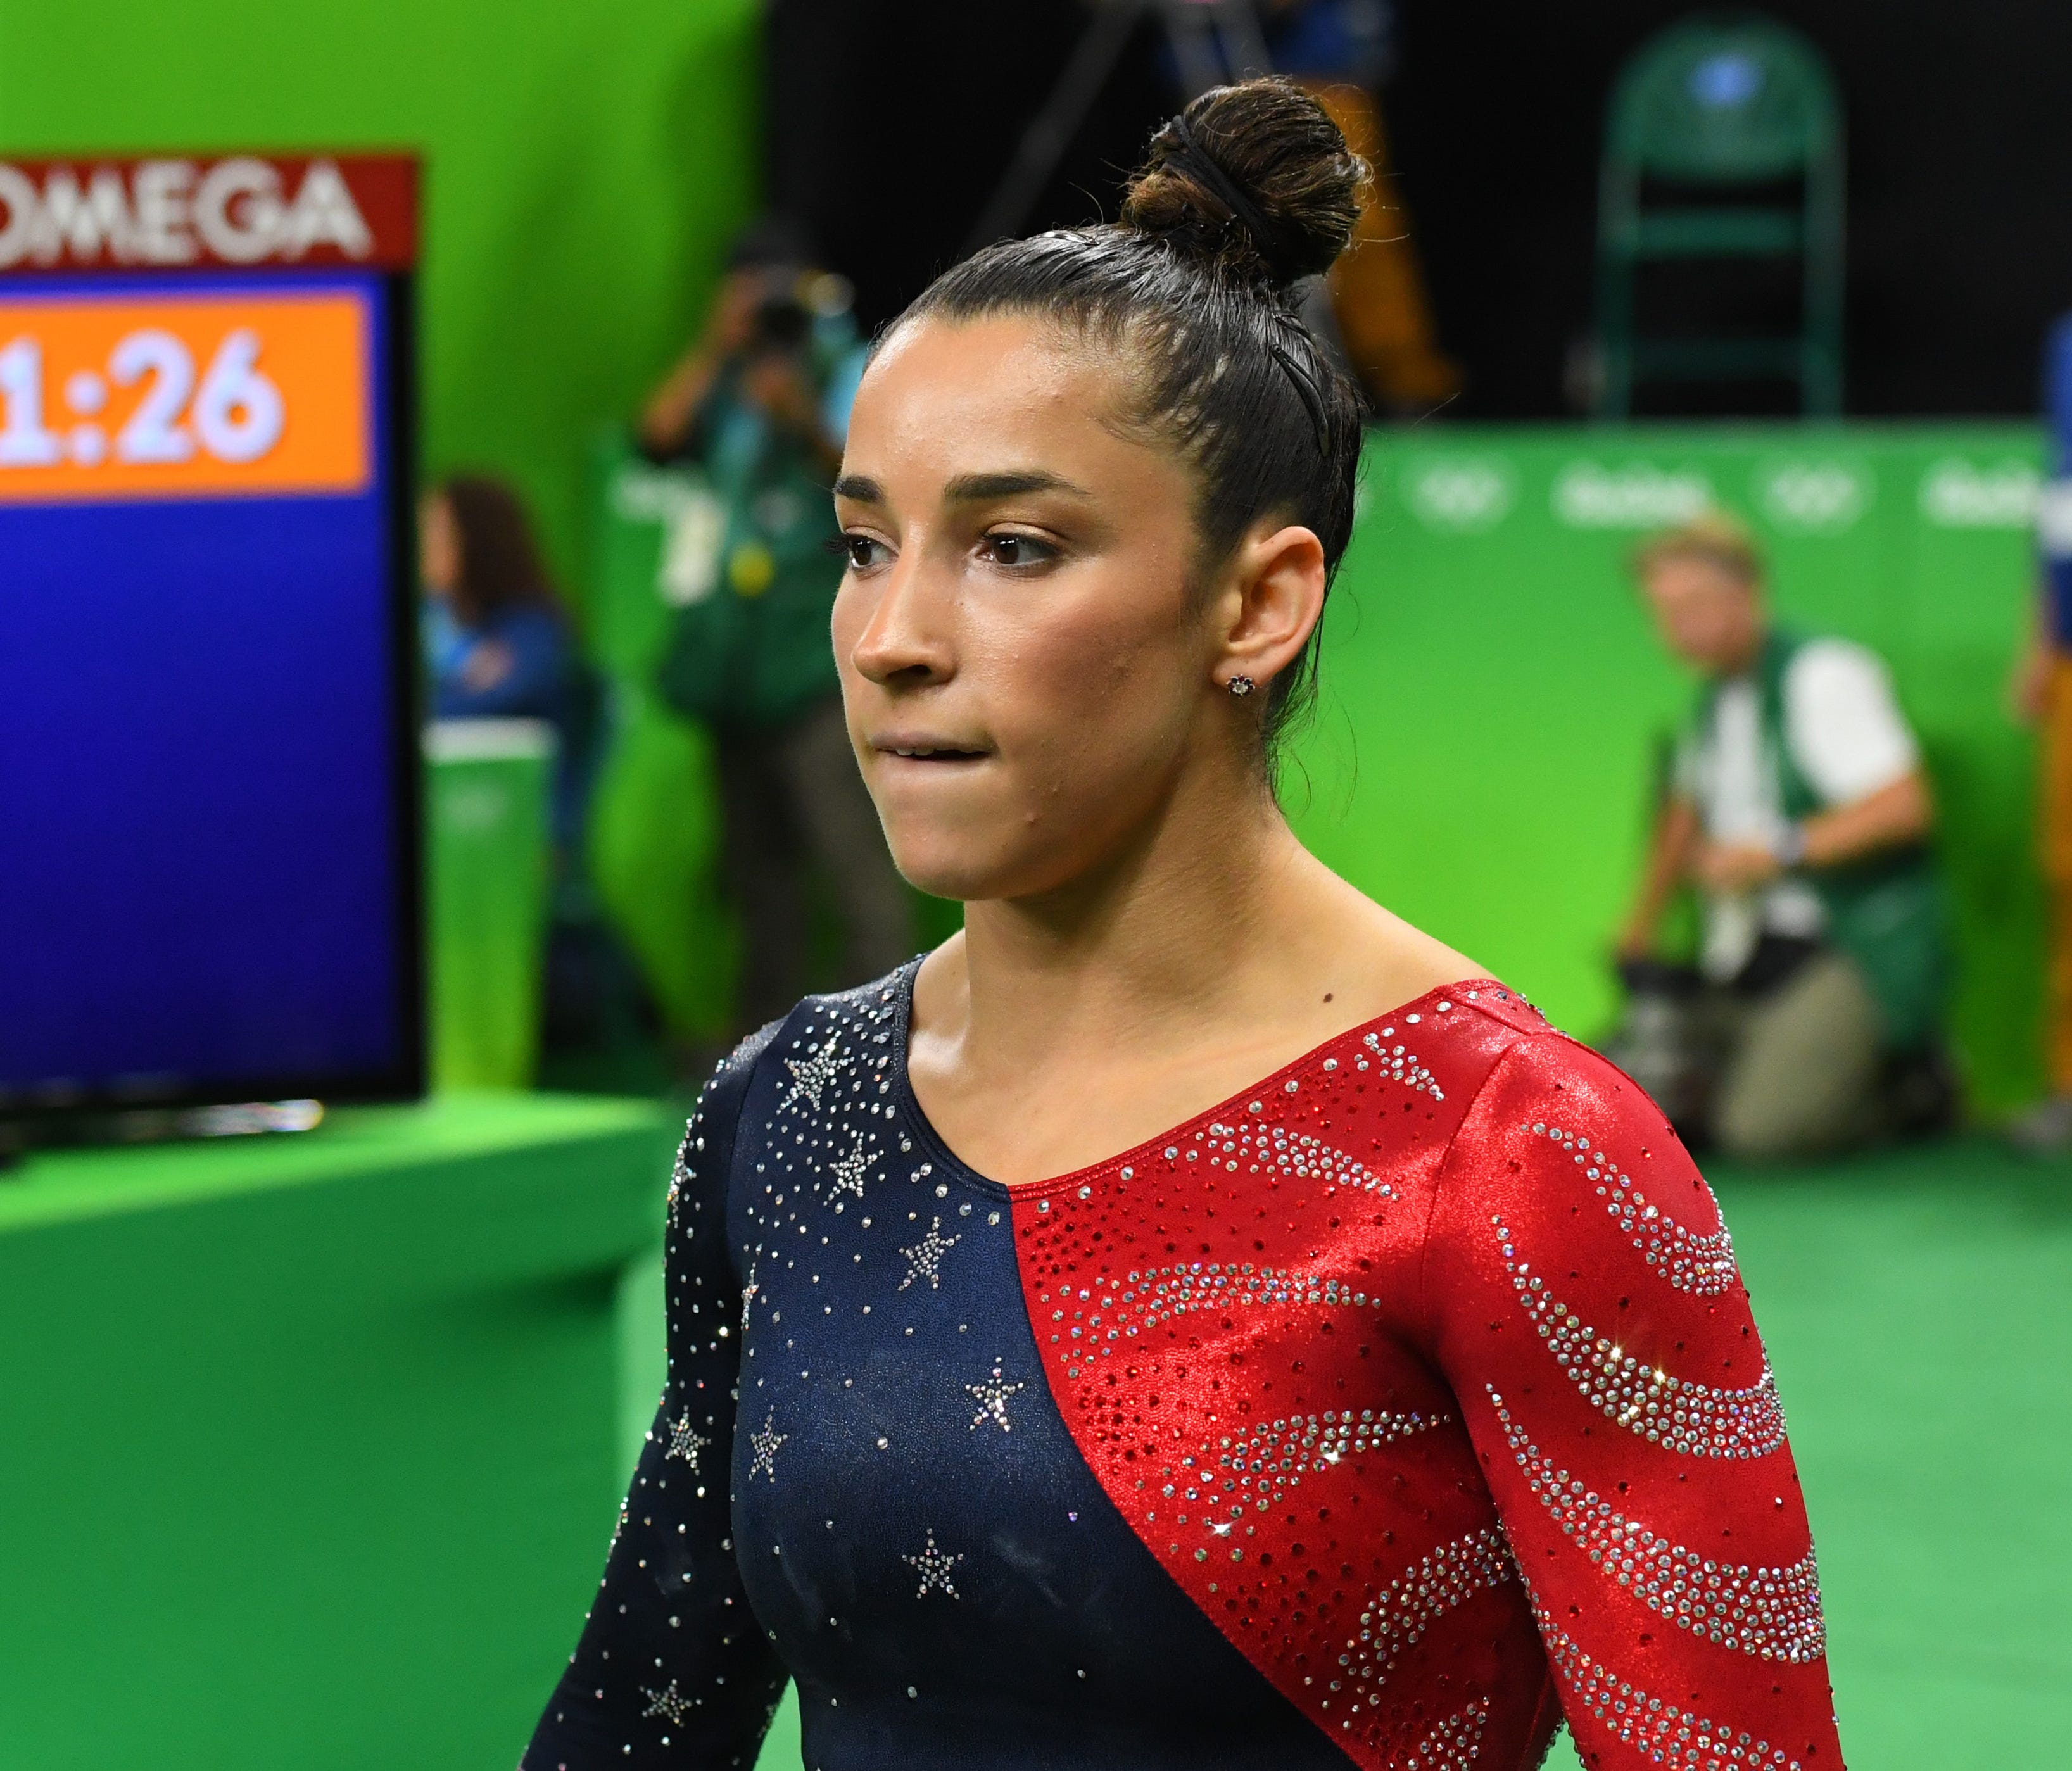 In an interview with 60 Minutes, Aly Raisman said a longtime USA Gymnastics doctor accused of sexually abusing her and other women gained her trust by bringing her desserts or gifts.